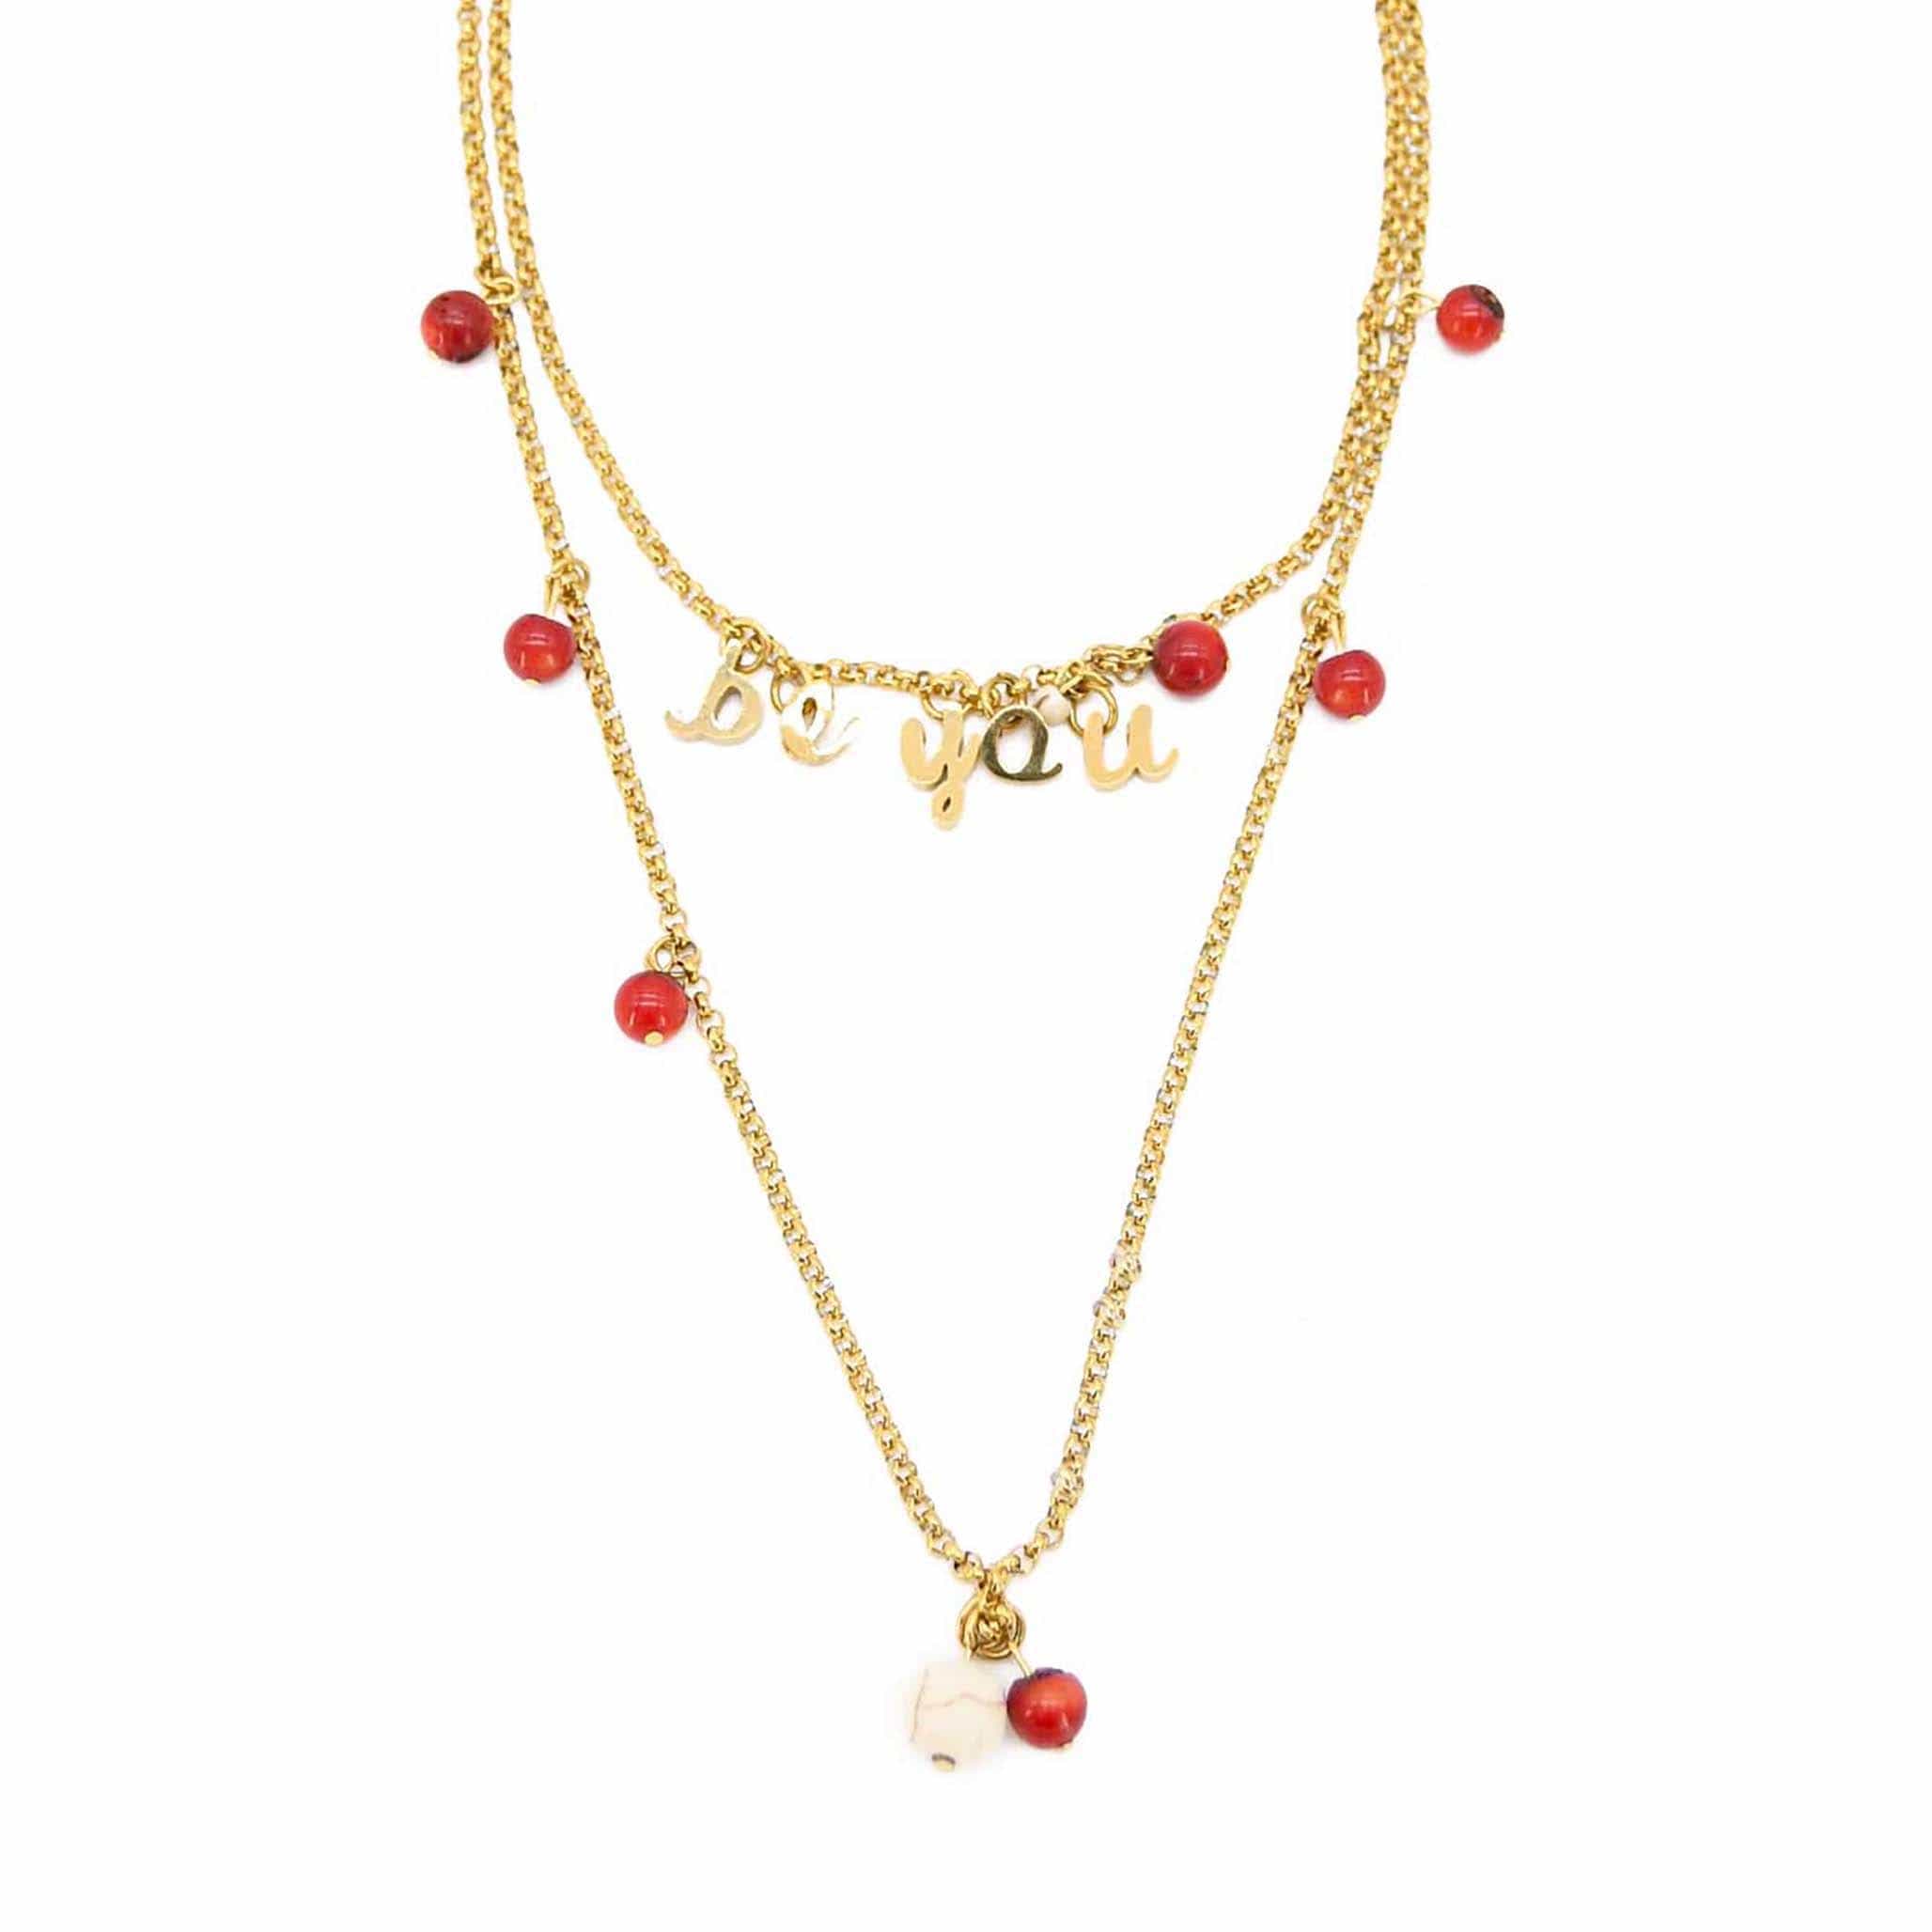 Adiba Women's Gold / Red Be You Handmade Necklace